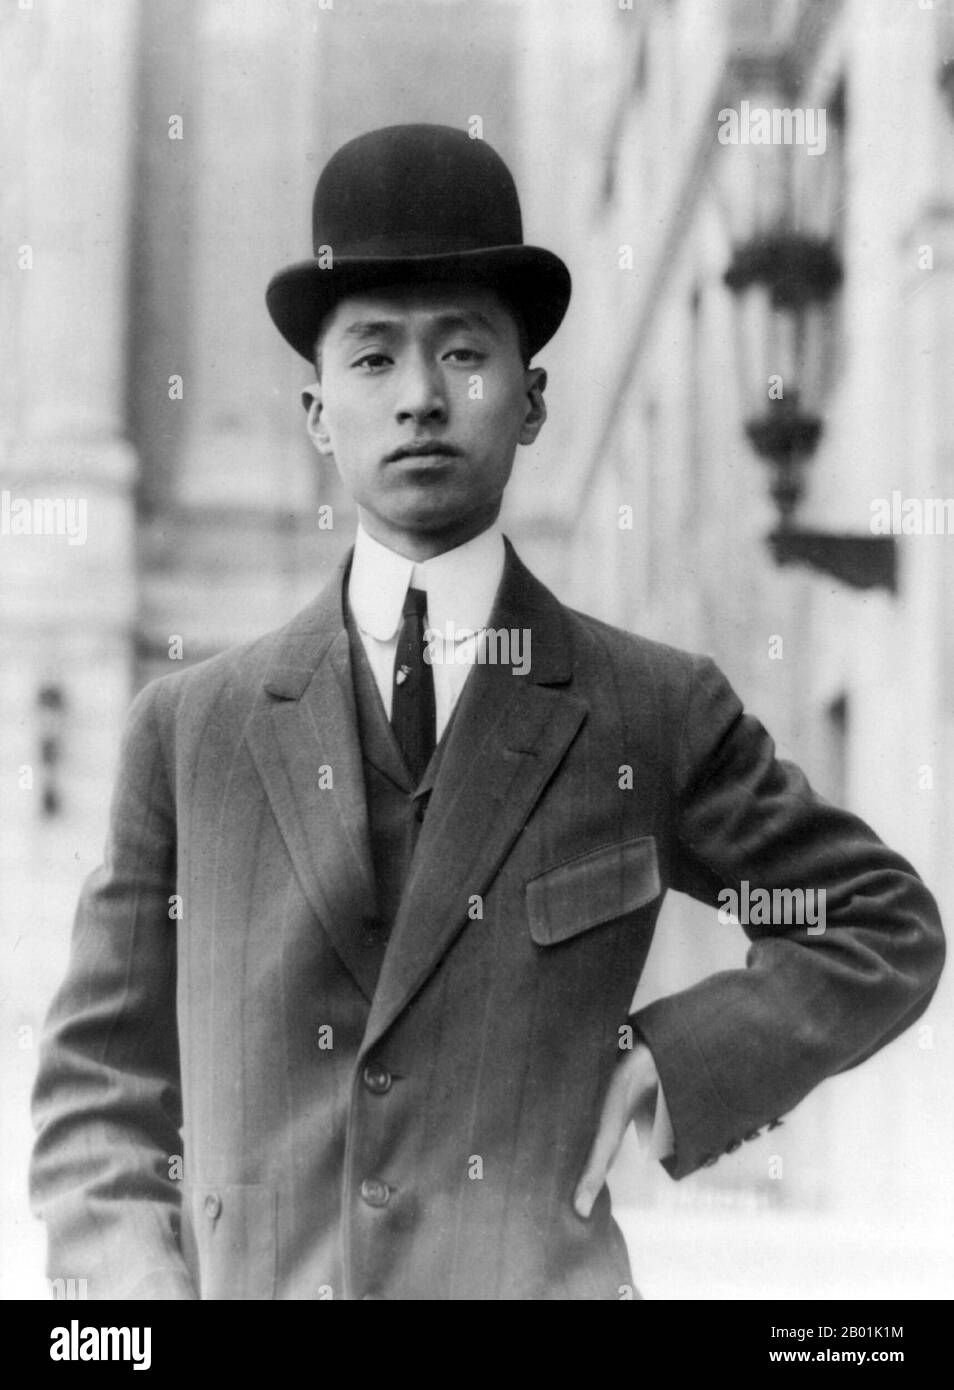 China: Guo Weijun or Wellington Koo (29 January 1887 - 14 November 1985), Premier of the Republic of China (2 July 1924 - 14 September 1924), 29 May 1912.  Koo Vi Kyuin or Ku Wei-chün, often known by the Western name V.K. Wellington Koo, was a prominent diplomat under the Republic of China, representative to the Paris Peace Conference of 1919, ambassador to France, Great Britain and the United States, participant in founding the League of Nations and the United Nations; and judge on the International Court of Justice at the Hague from 1957 to 1967. Stock Photo